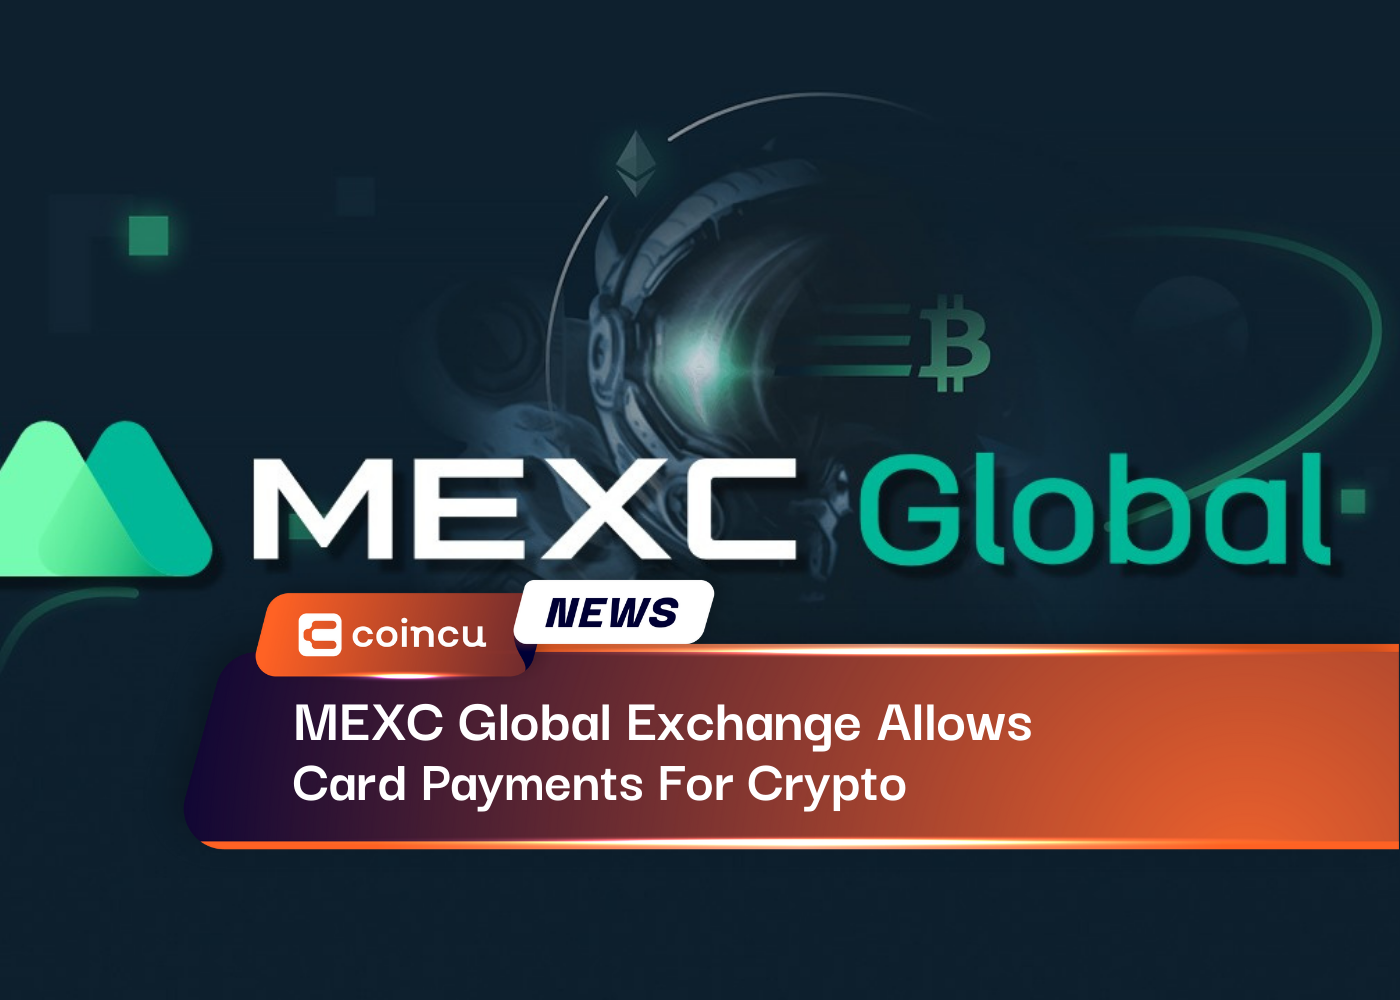 MEXC Global Exchange Allows